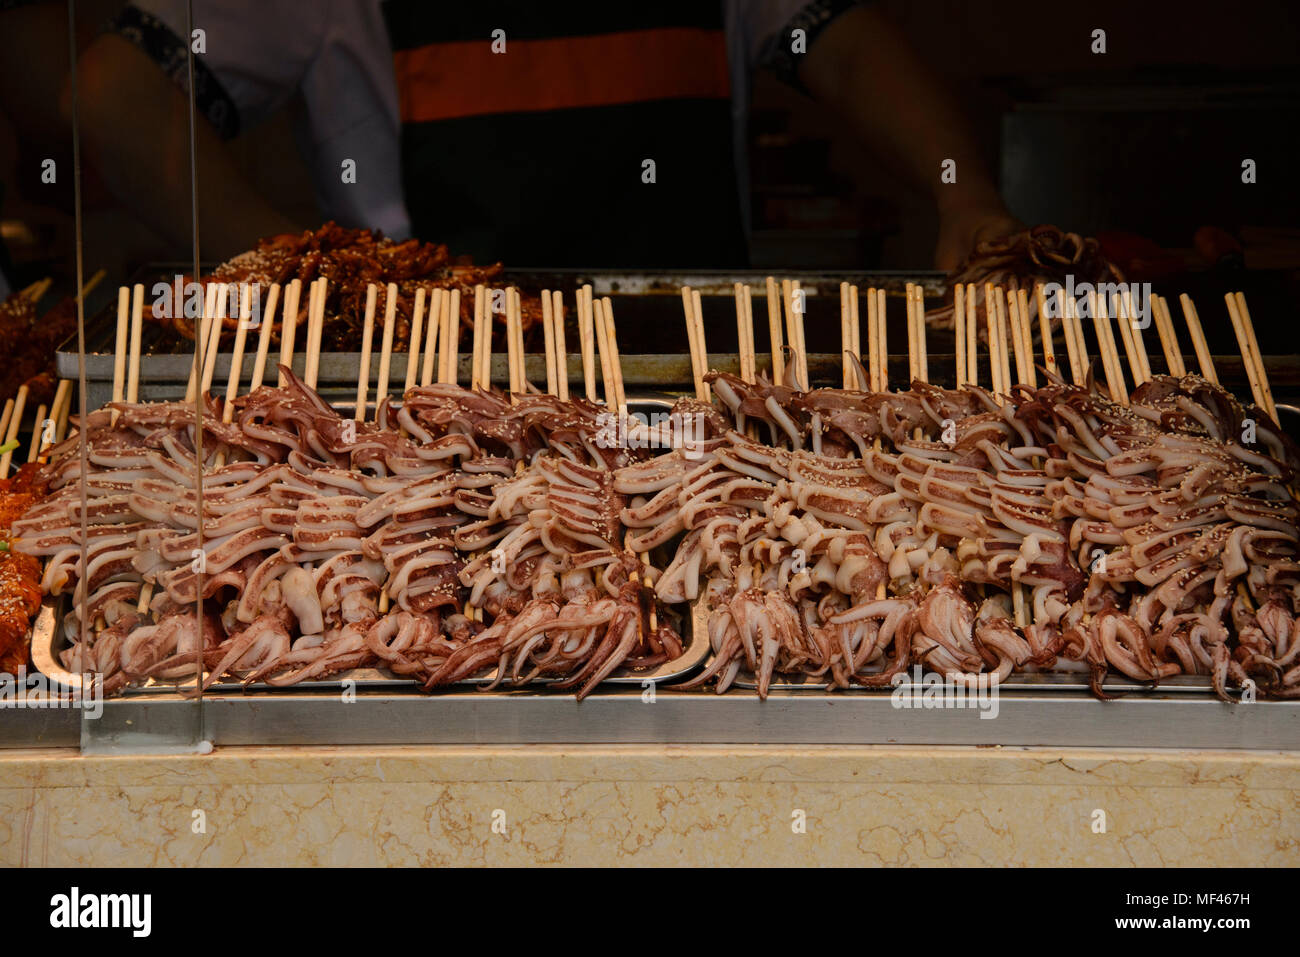 Skewers for sale on Jinli Ancient Street, Chengdu, China Stock Photo